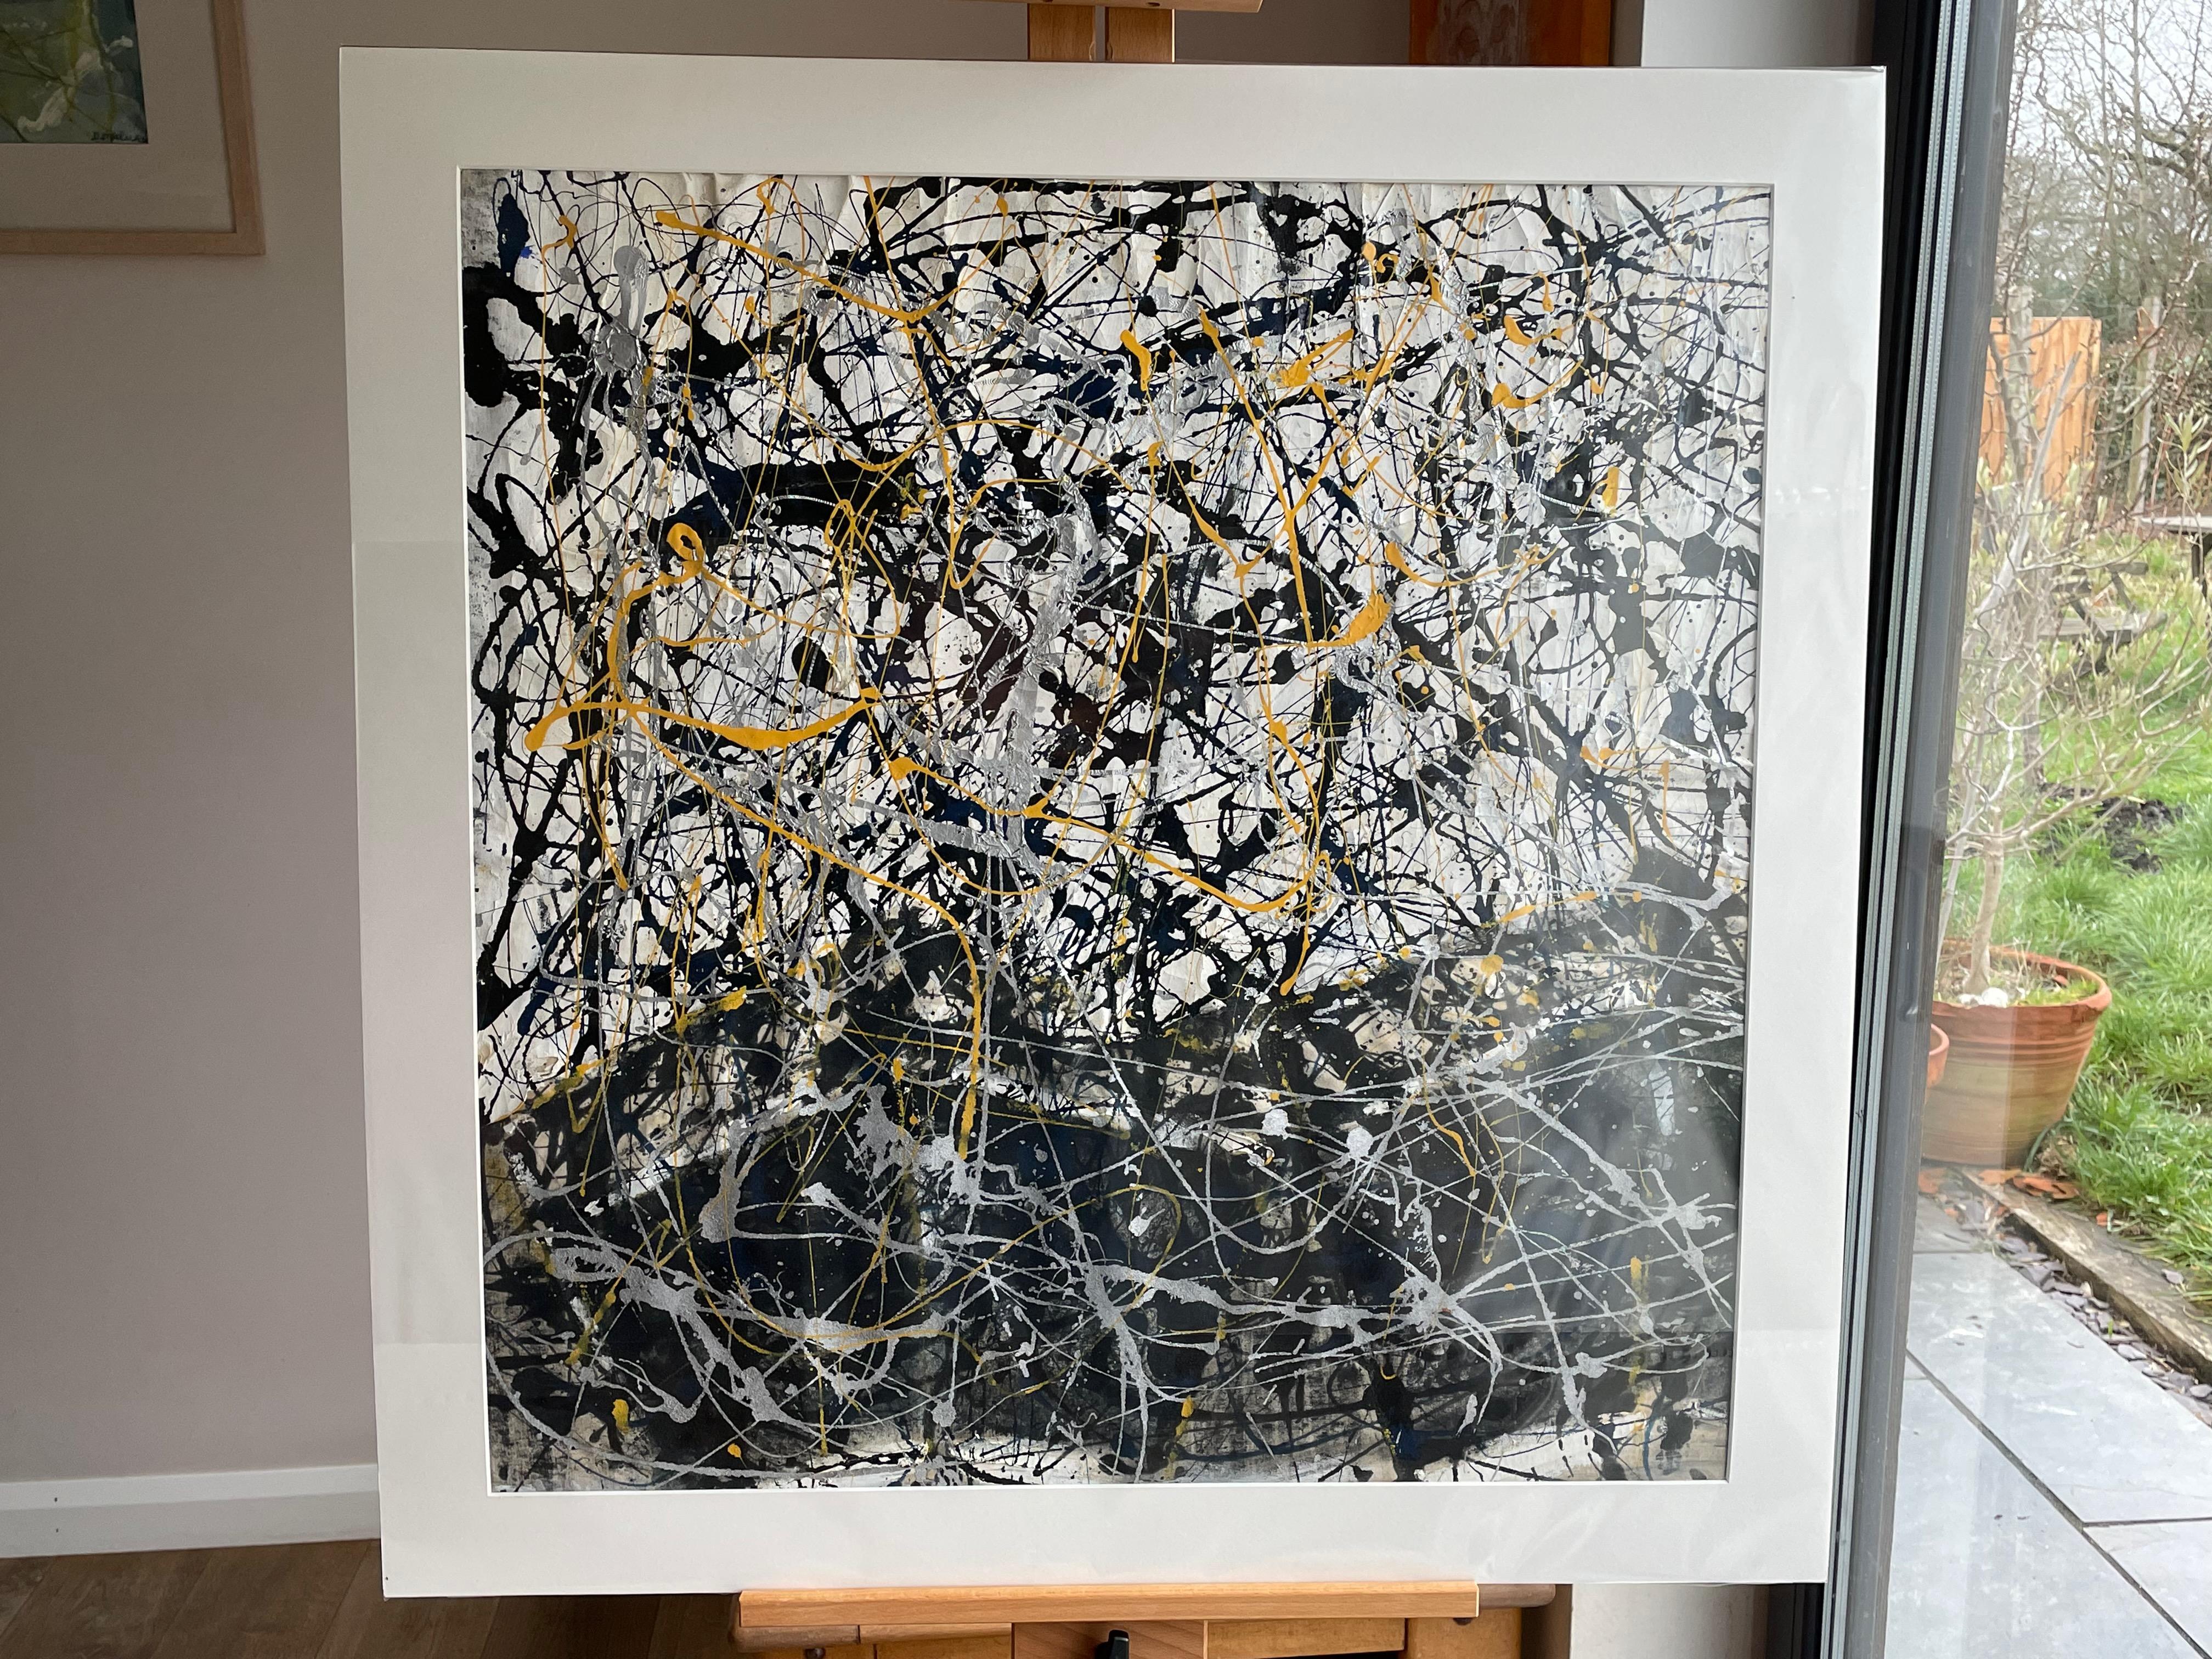 A large piece that uses colour in a particularly expressive way. This painting is warm and fluid contrasting monotones with splatters of yellow pigment.

Splatter painting on canvas.

Unsigned and mounted on card. In a frame it would look